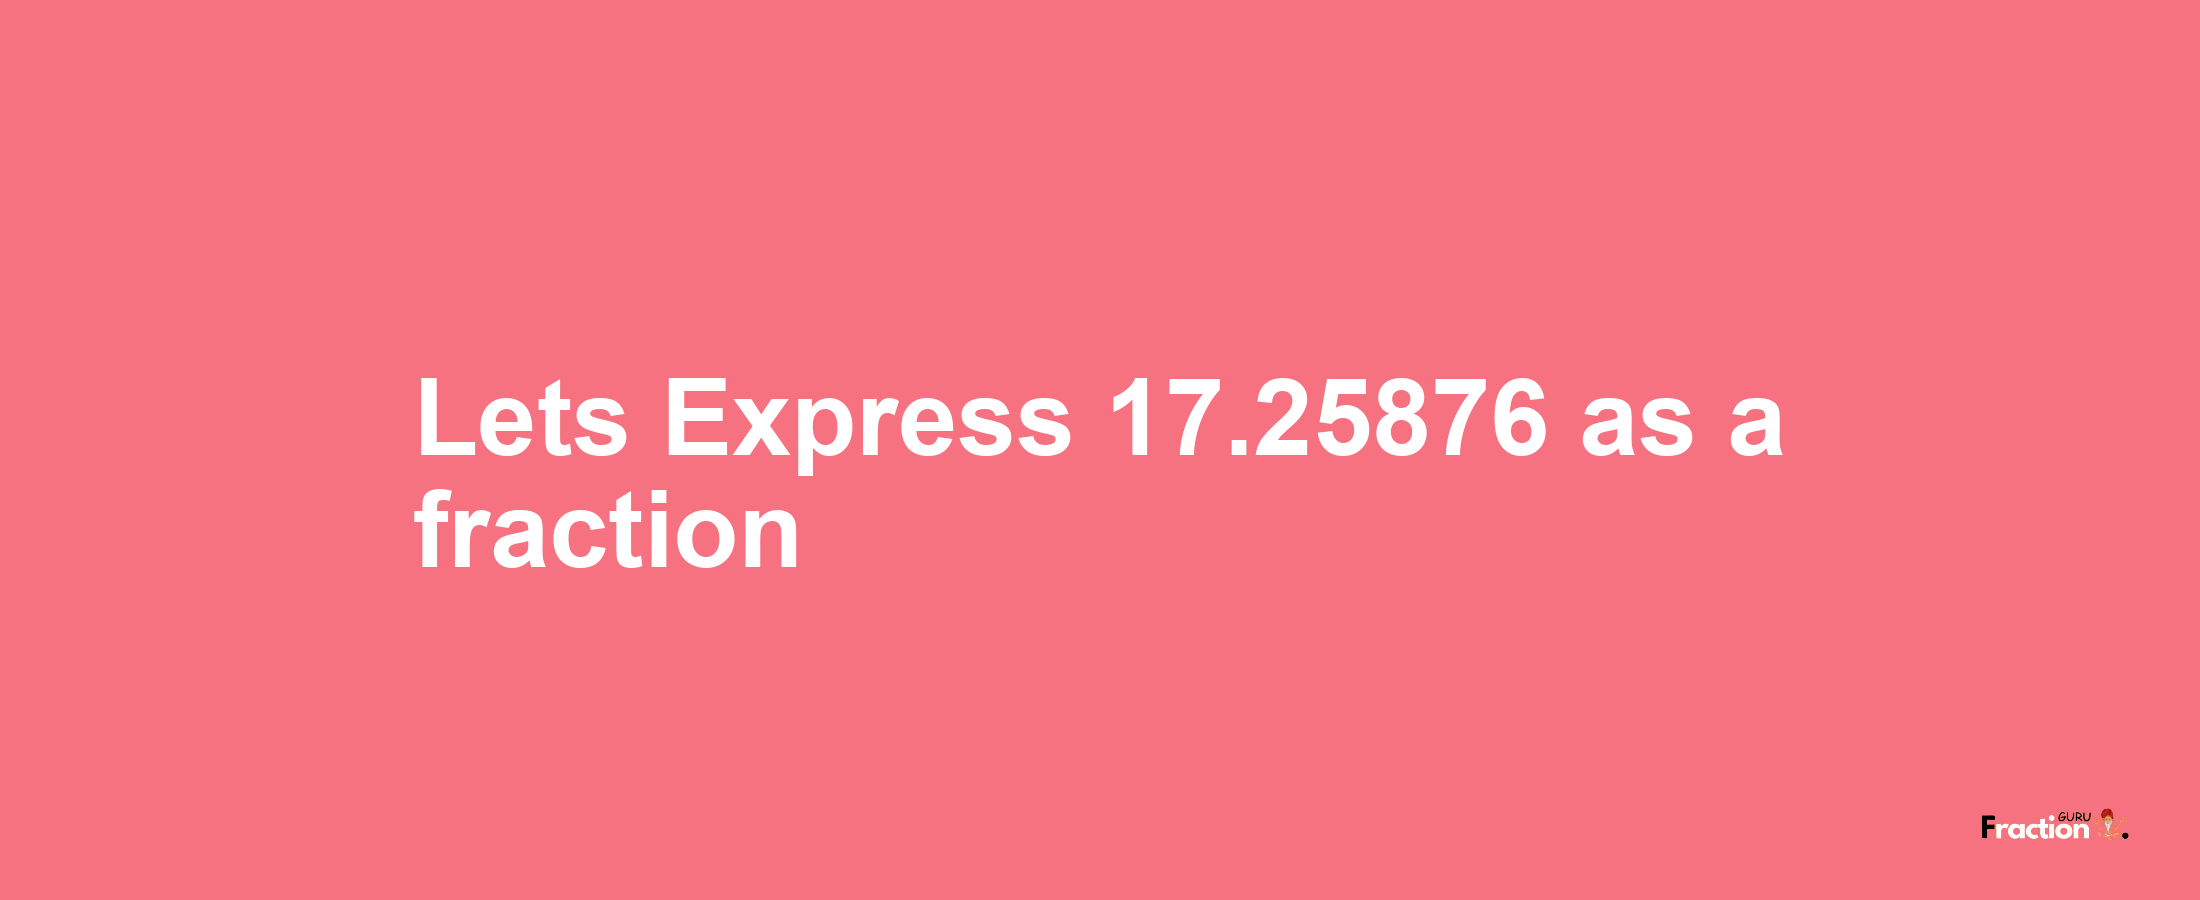 Lets Express 17.25876 as afraction